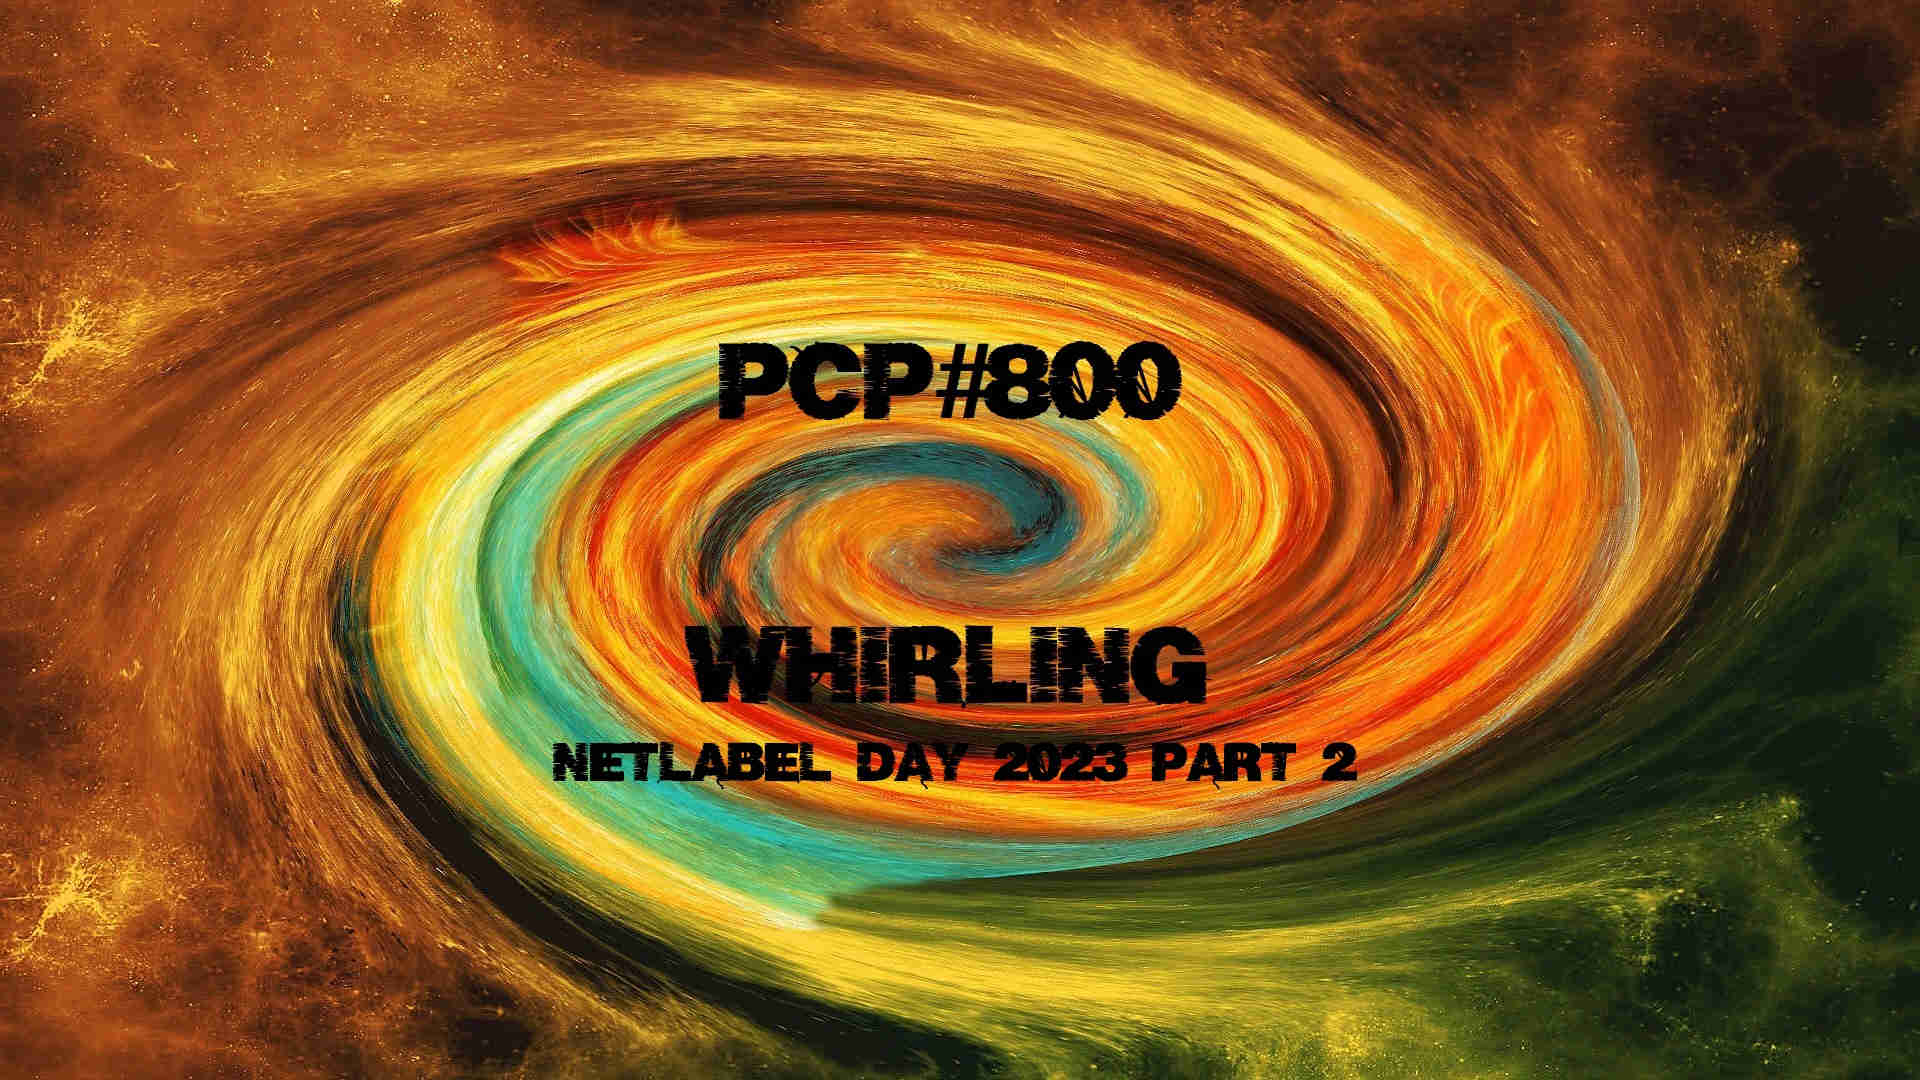 PCP#800... Whirling...Netlabel Day 2023 Part 2...